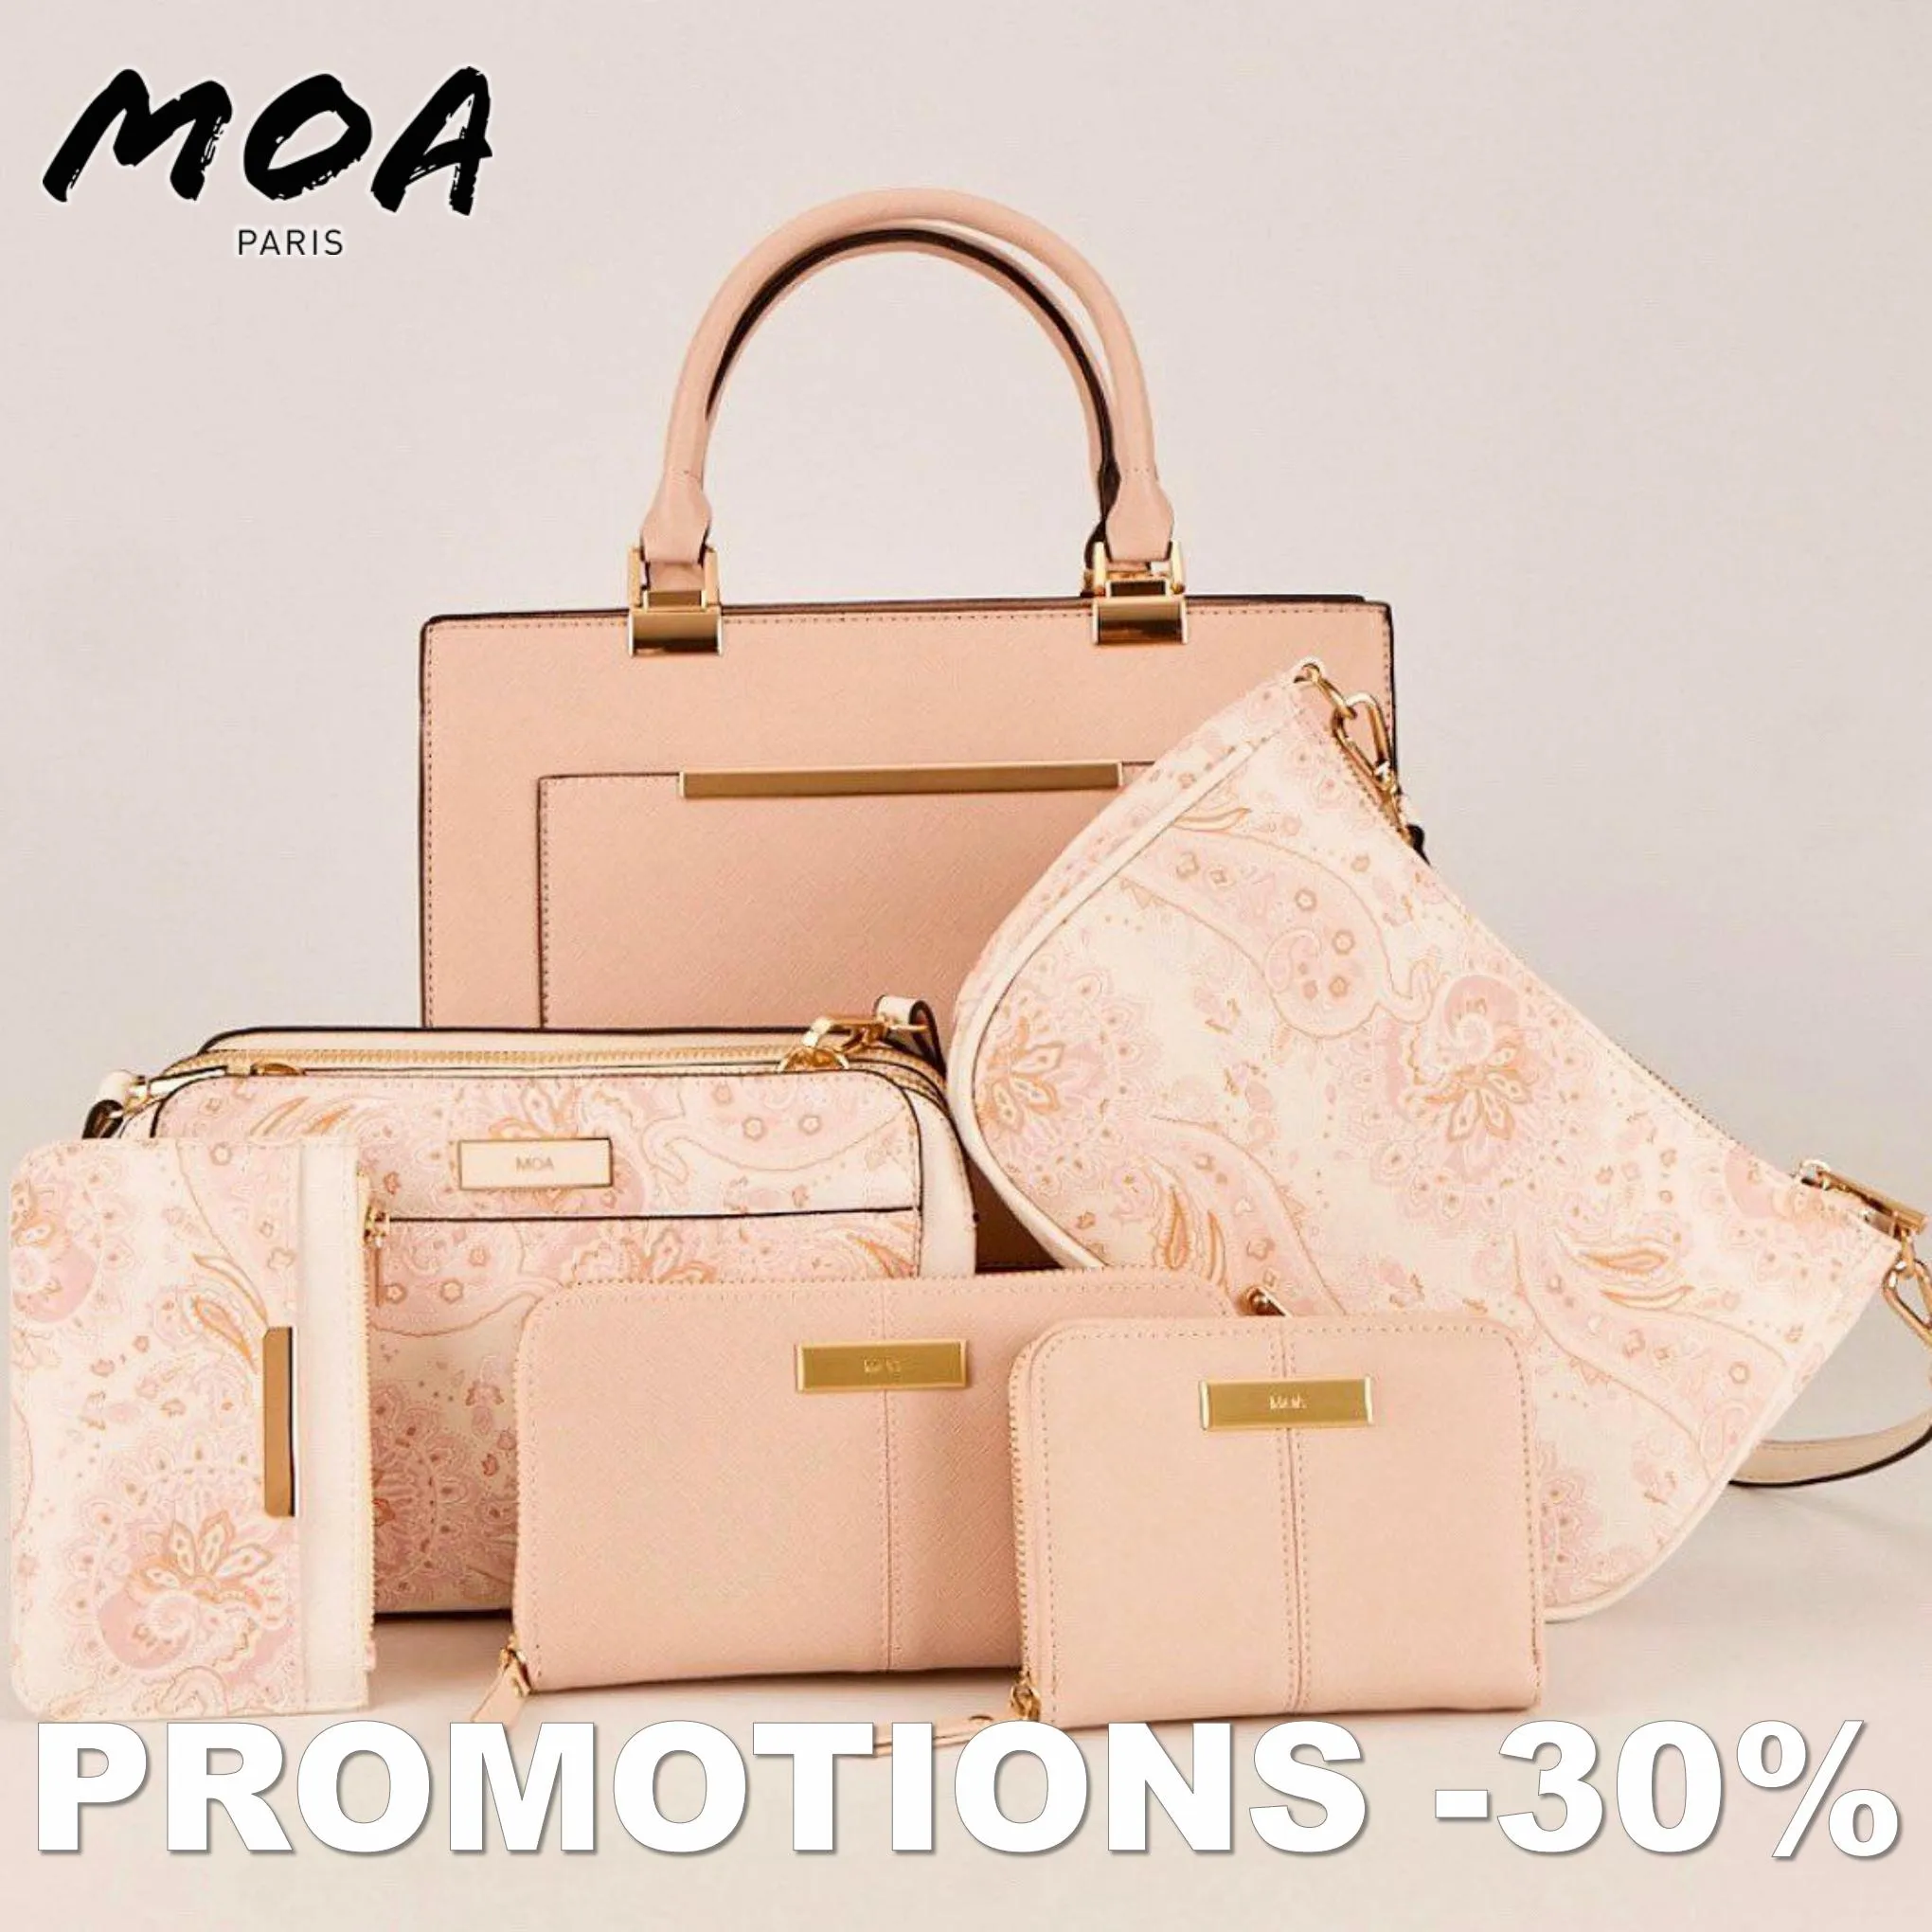 Catalogue PROMOTIONS -30%, page 00001